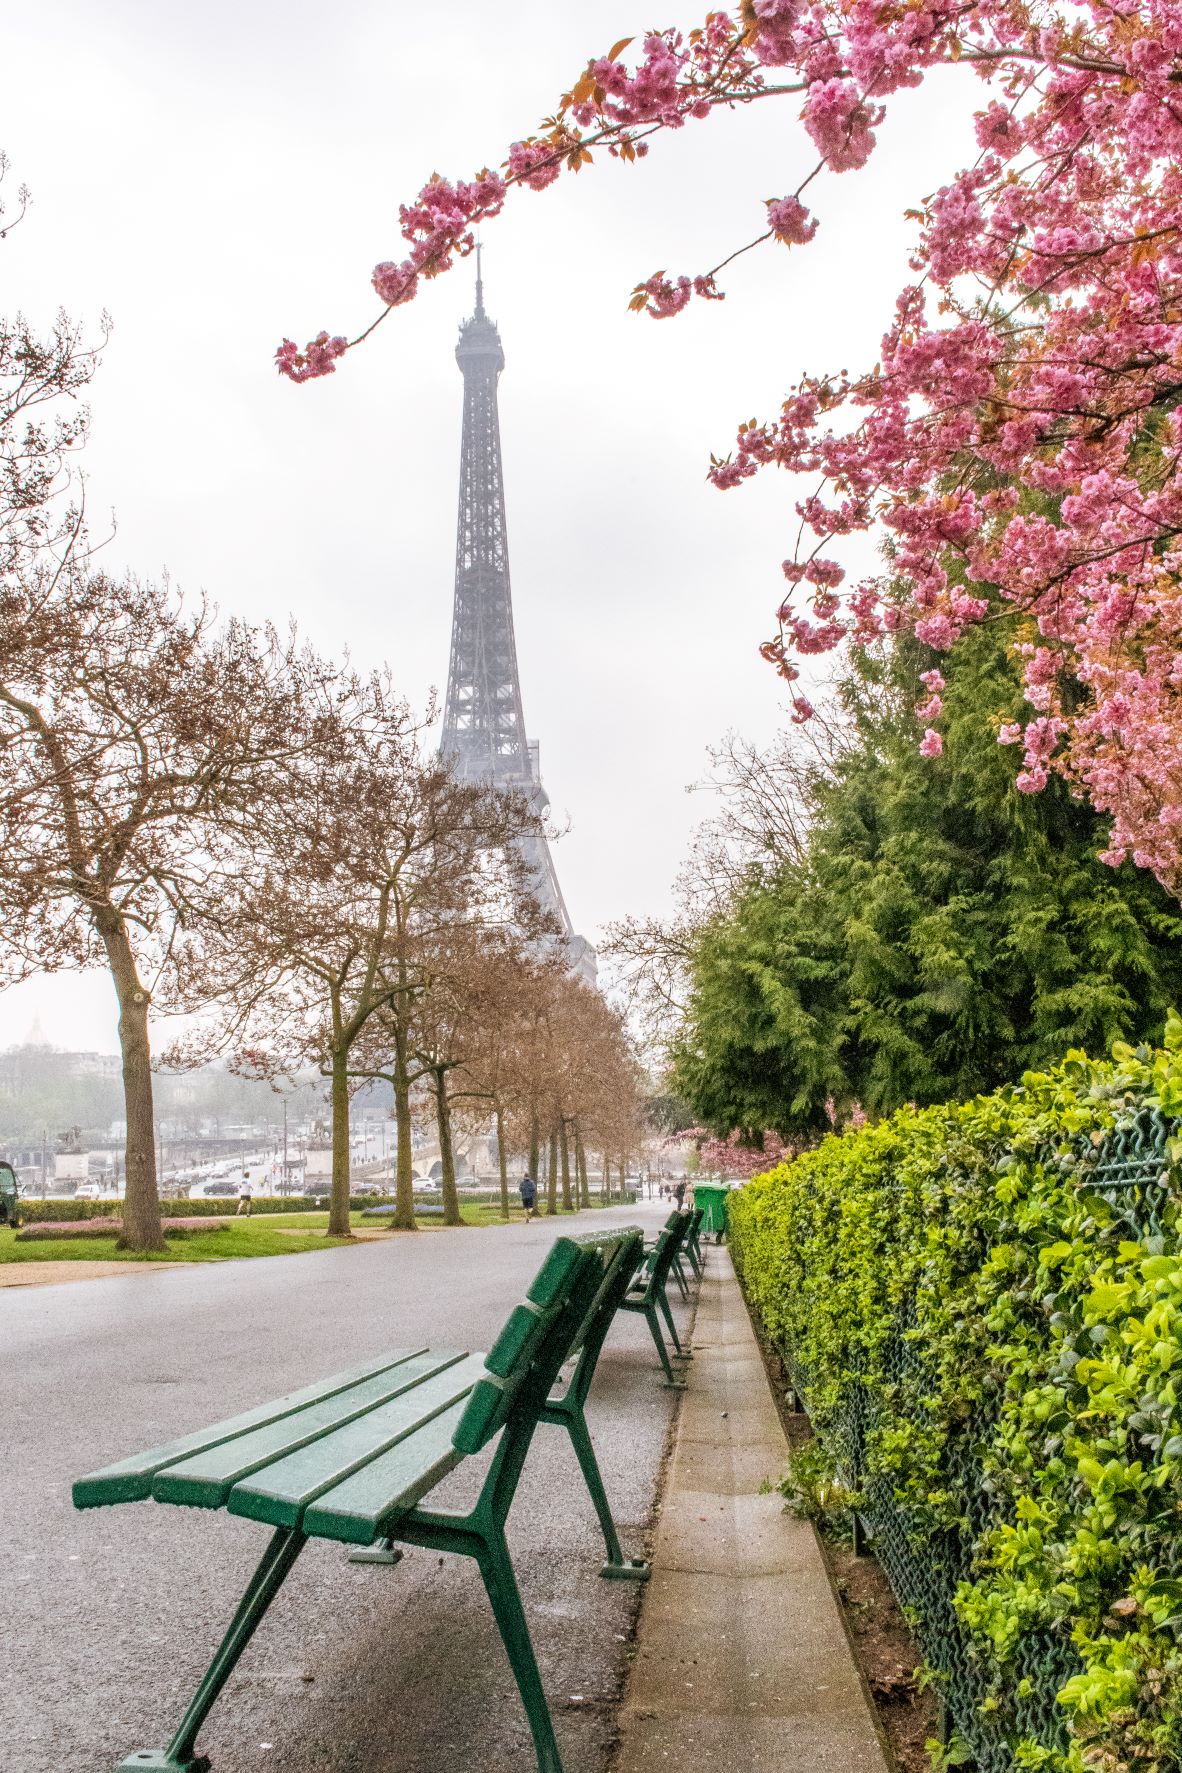 Eiffel Tower with pink blossom branches